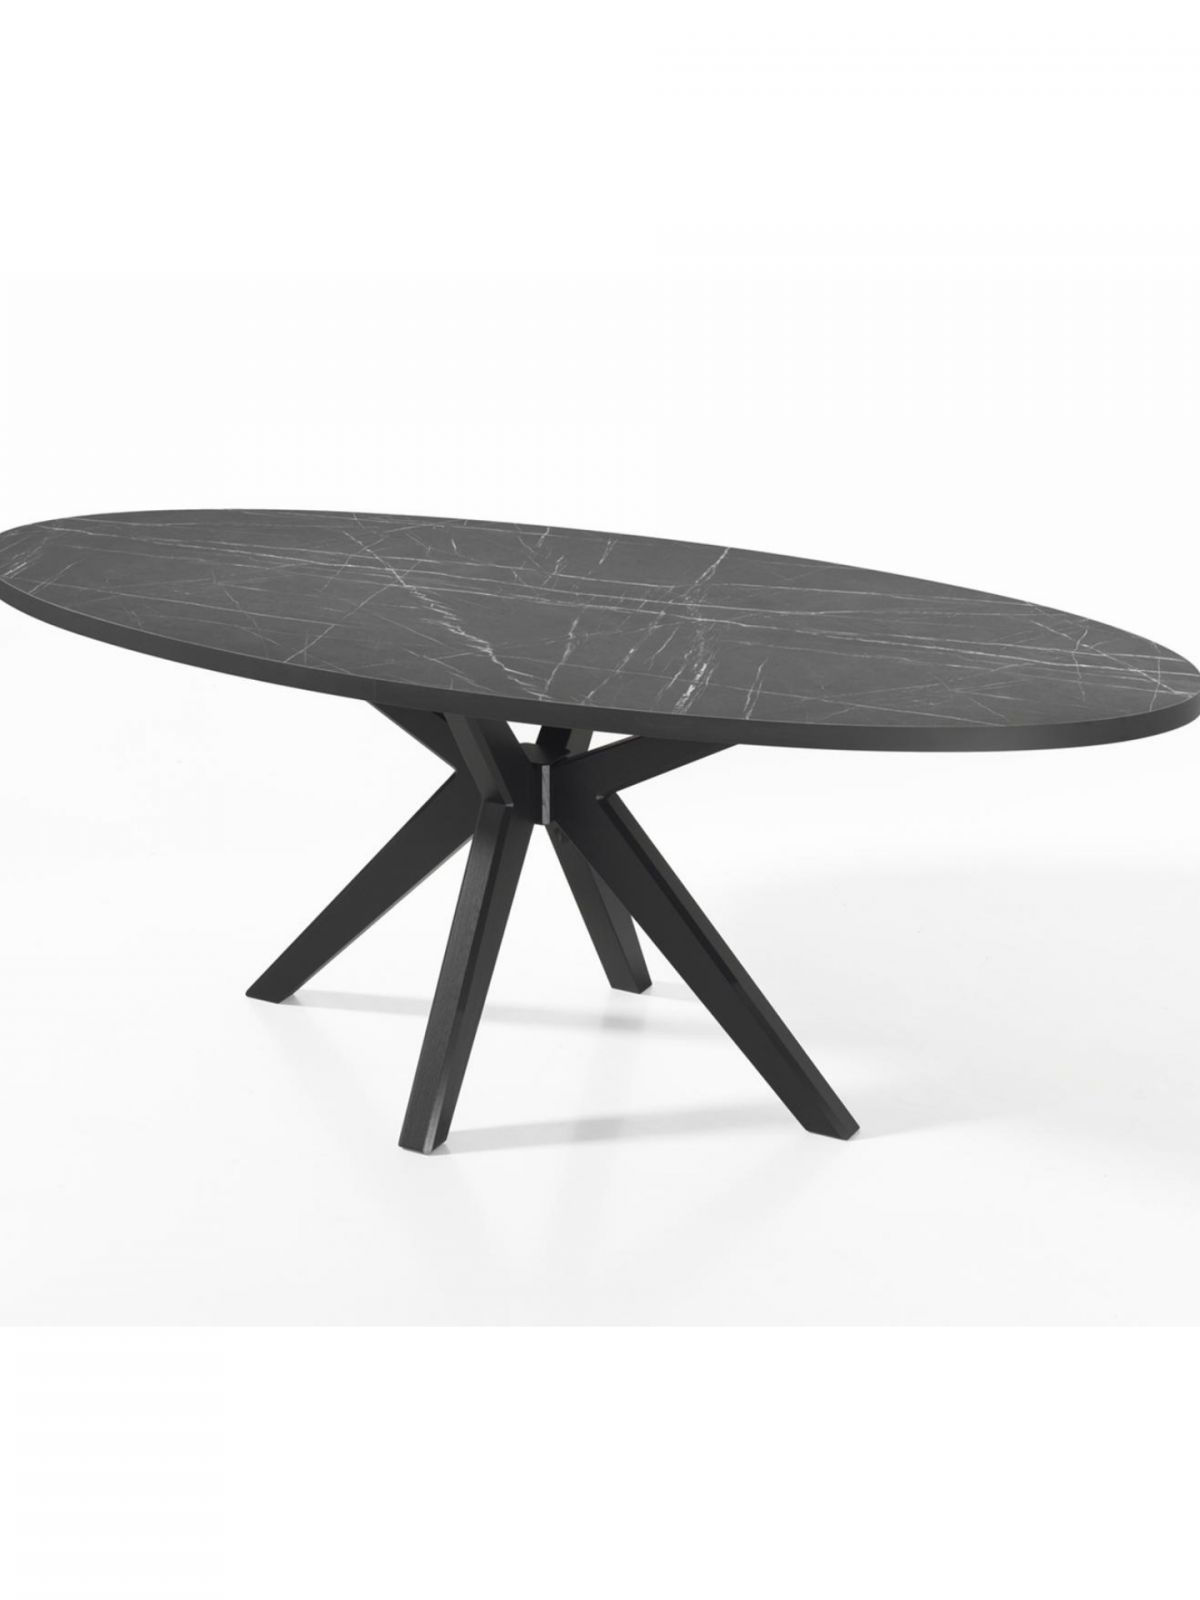 Table ovale fixe 2m X-pied massif